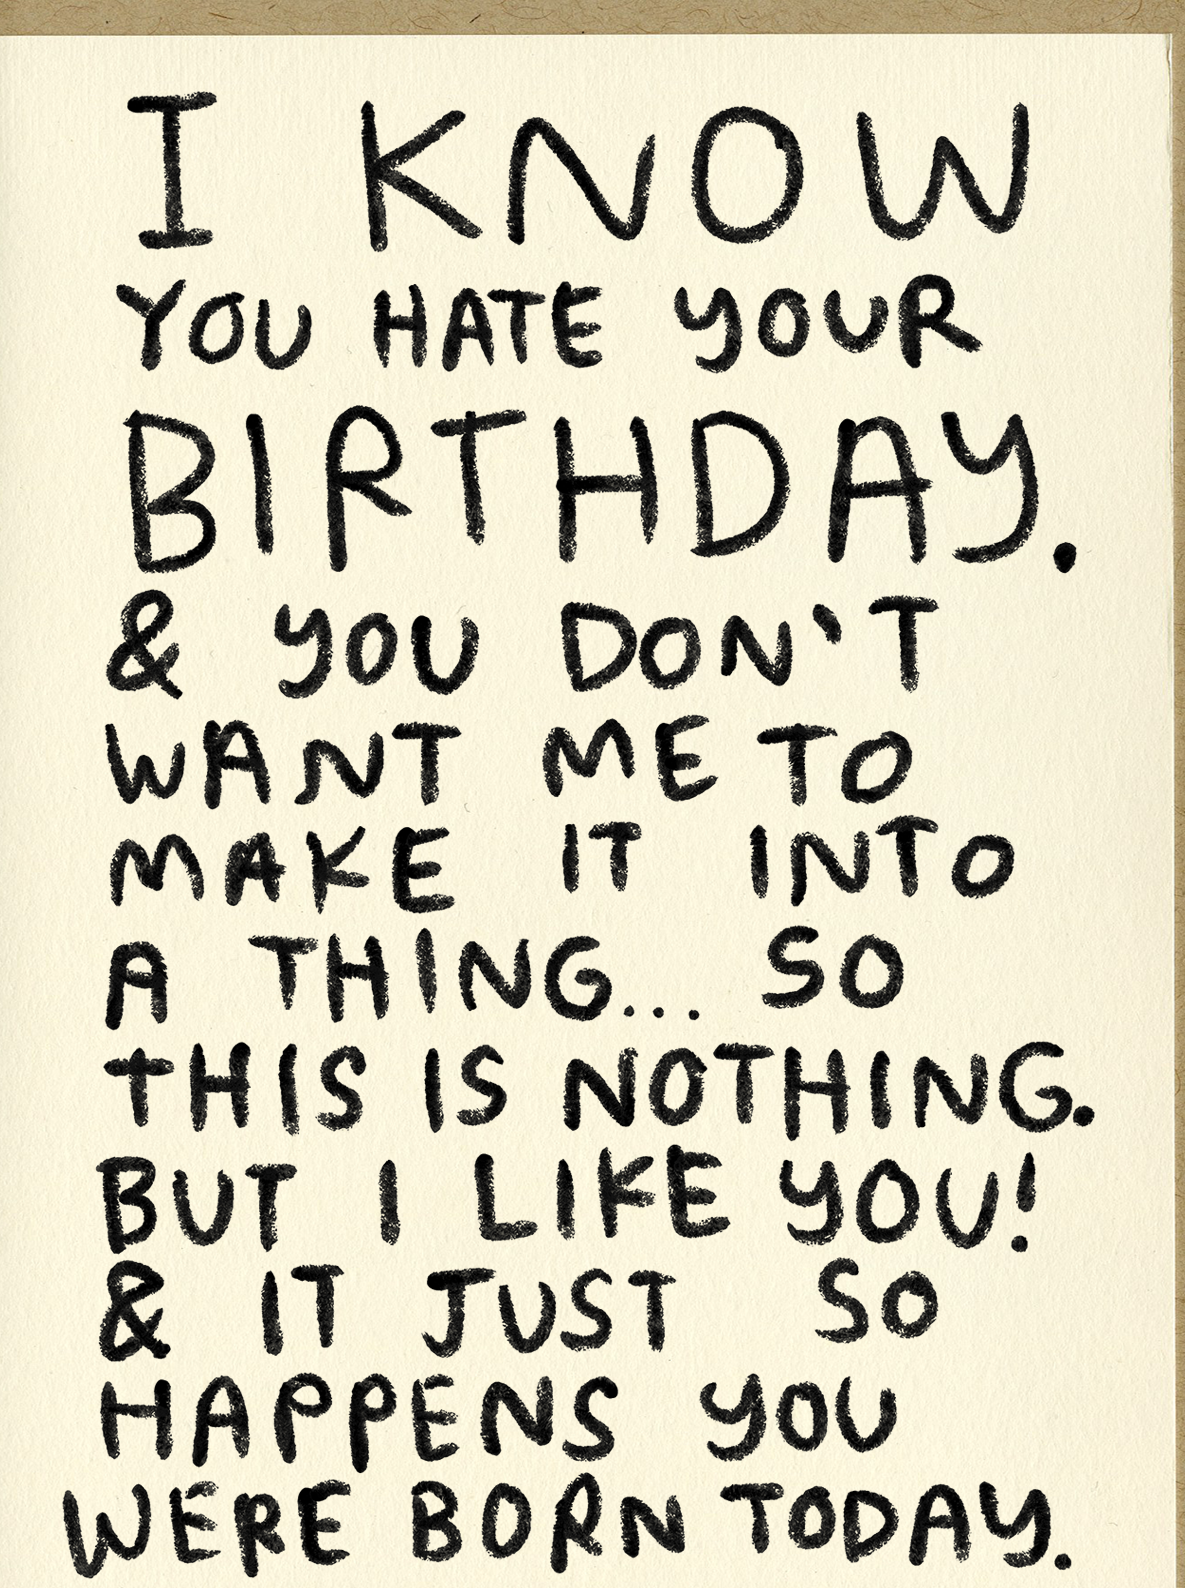 I Know You Hate Your Birthday Card